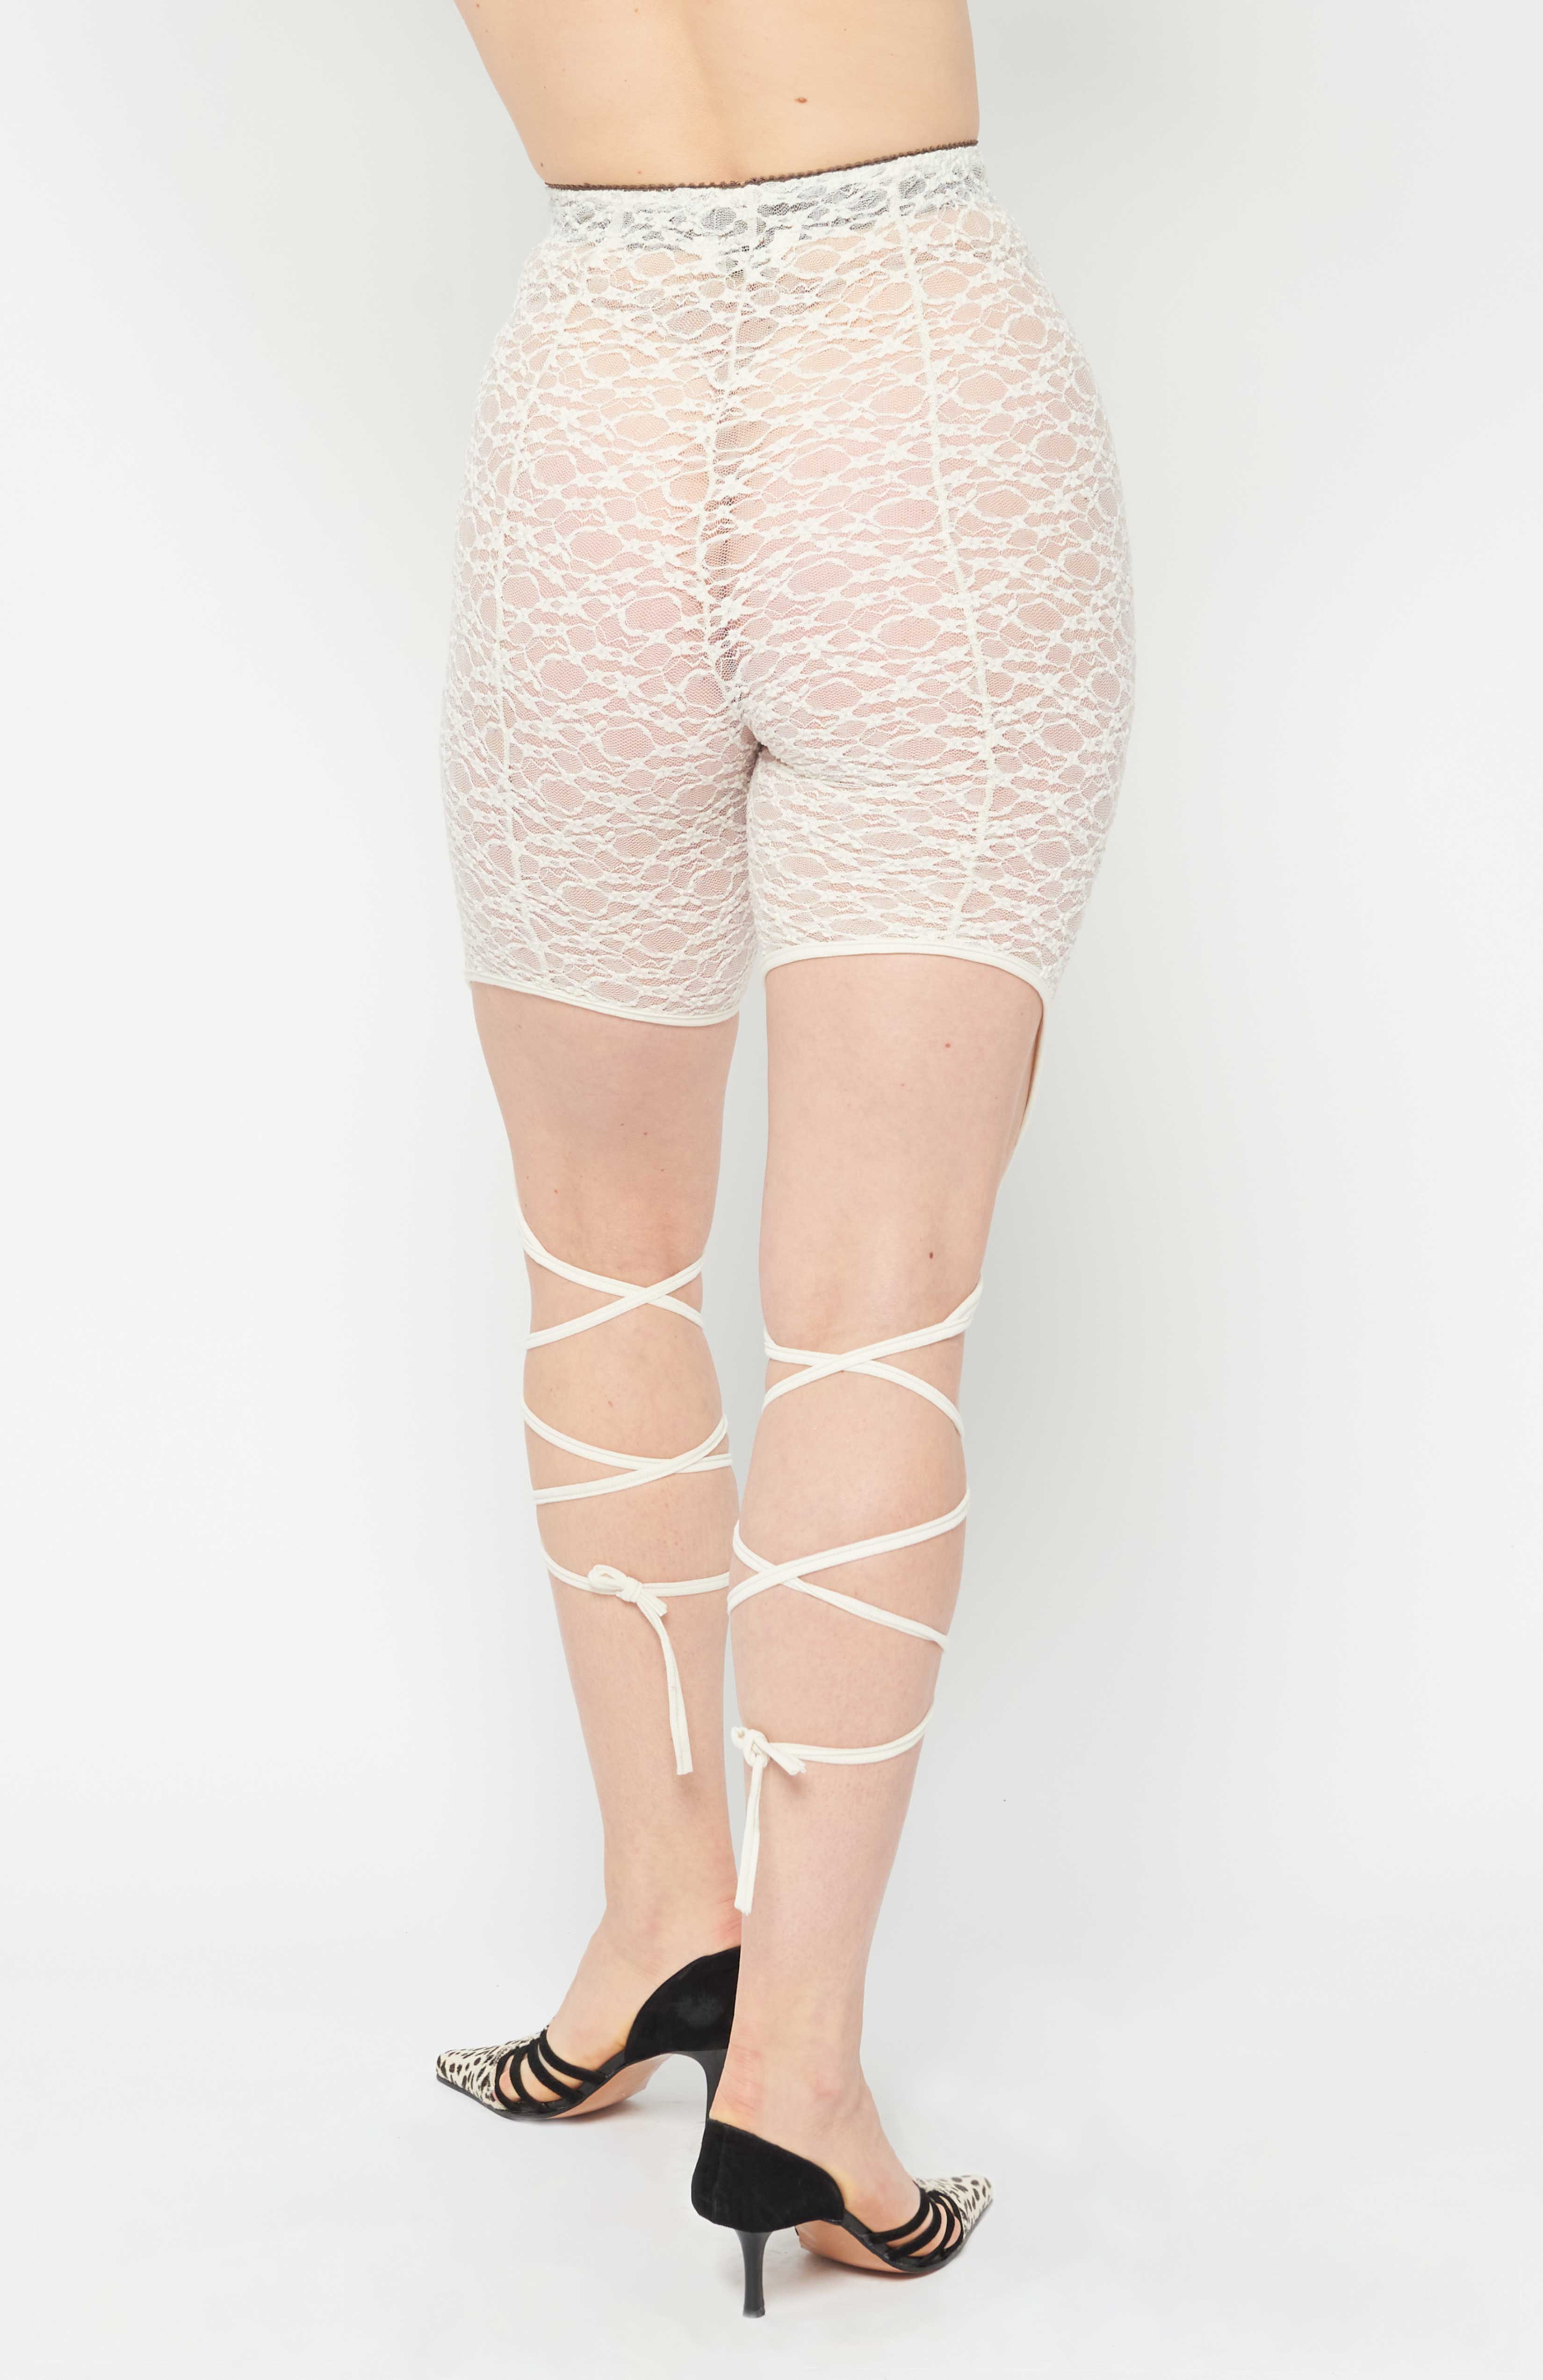 Maroske Peech High waisted ivory lace leggings with tendrils that grow from the knee. A spell is cast when these tendrils are wrapped around your legs and tied. Super comfortable and stretchy with a brushed elastic waistband.